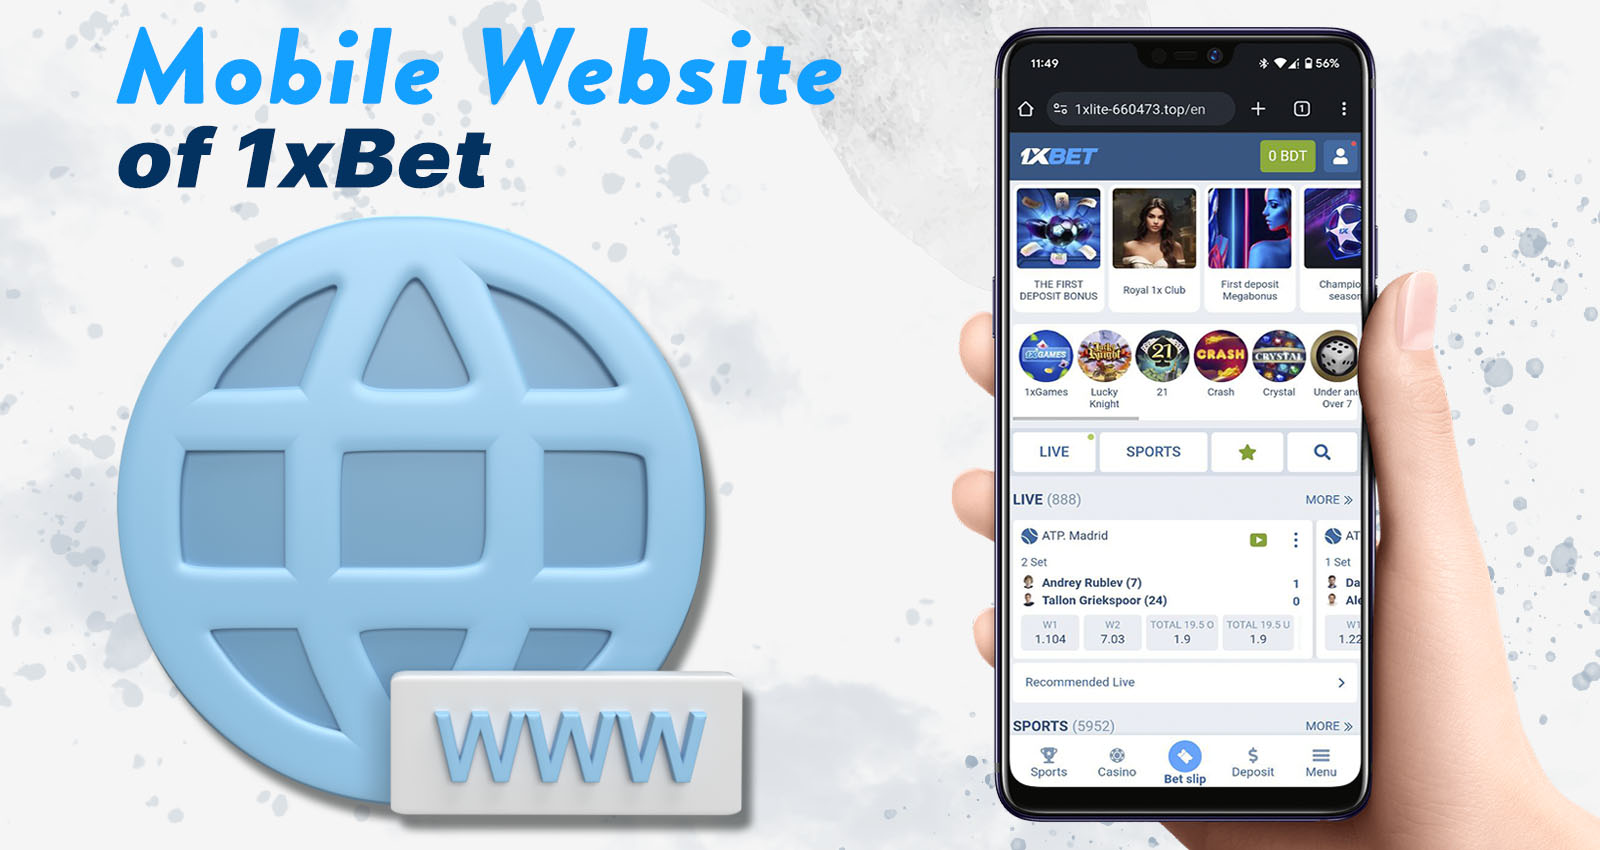  A user-friendly browser version of 1xBet